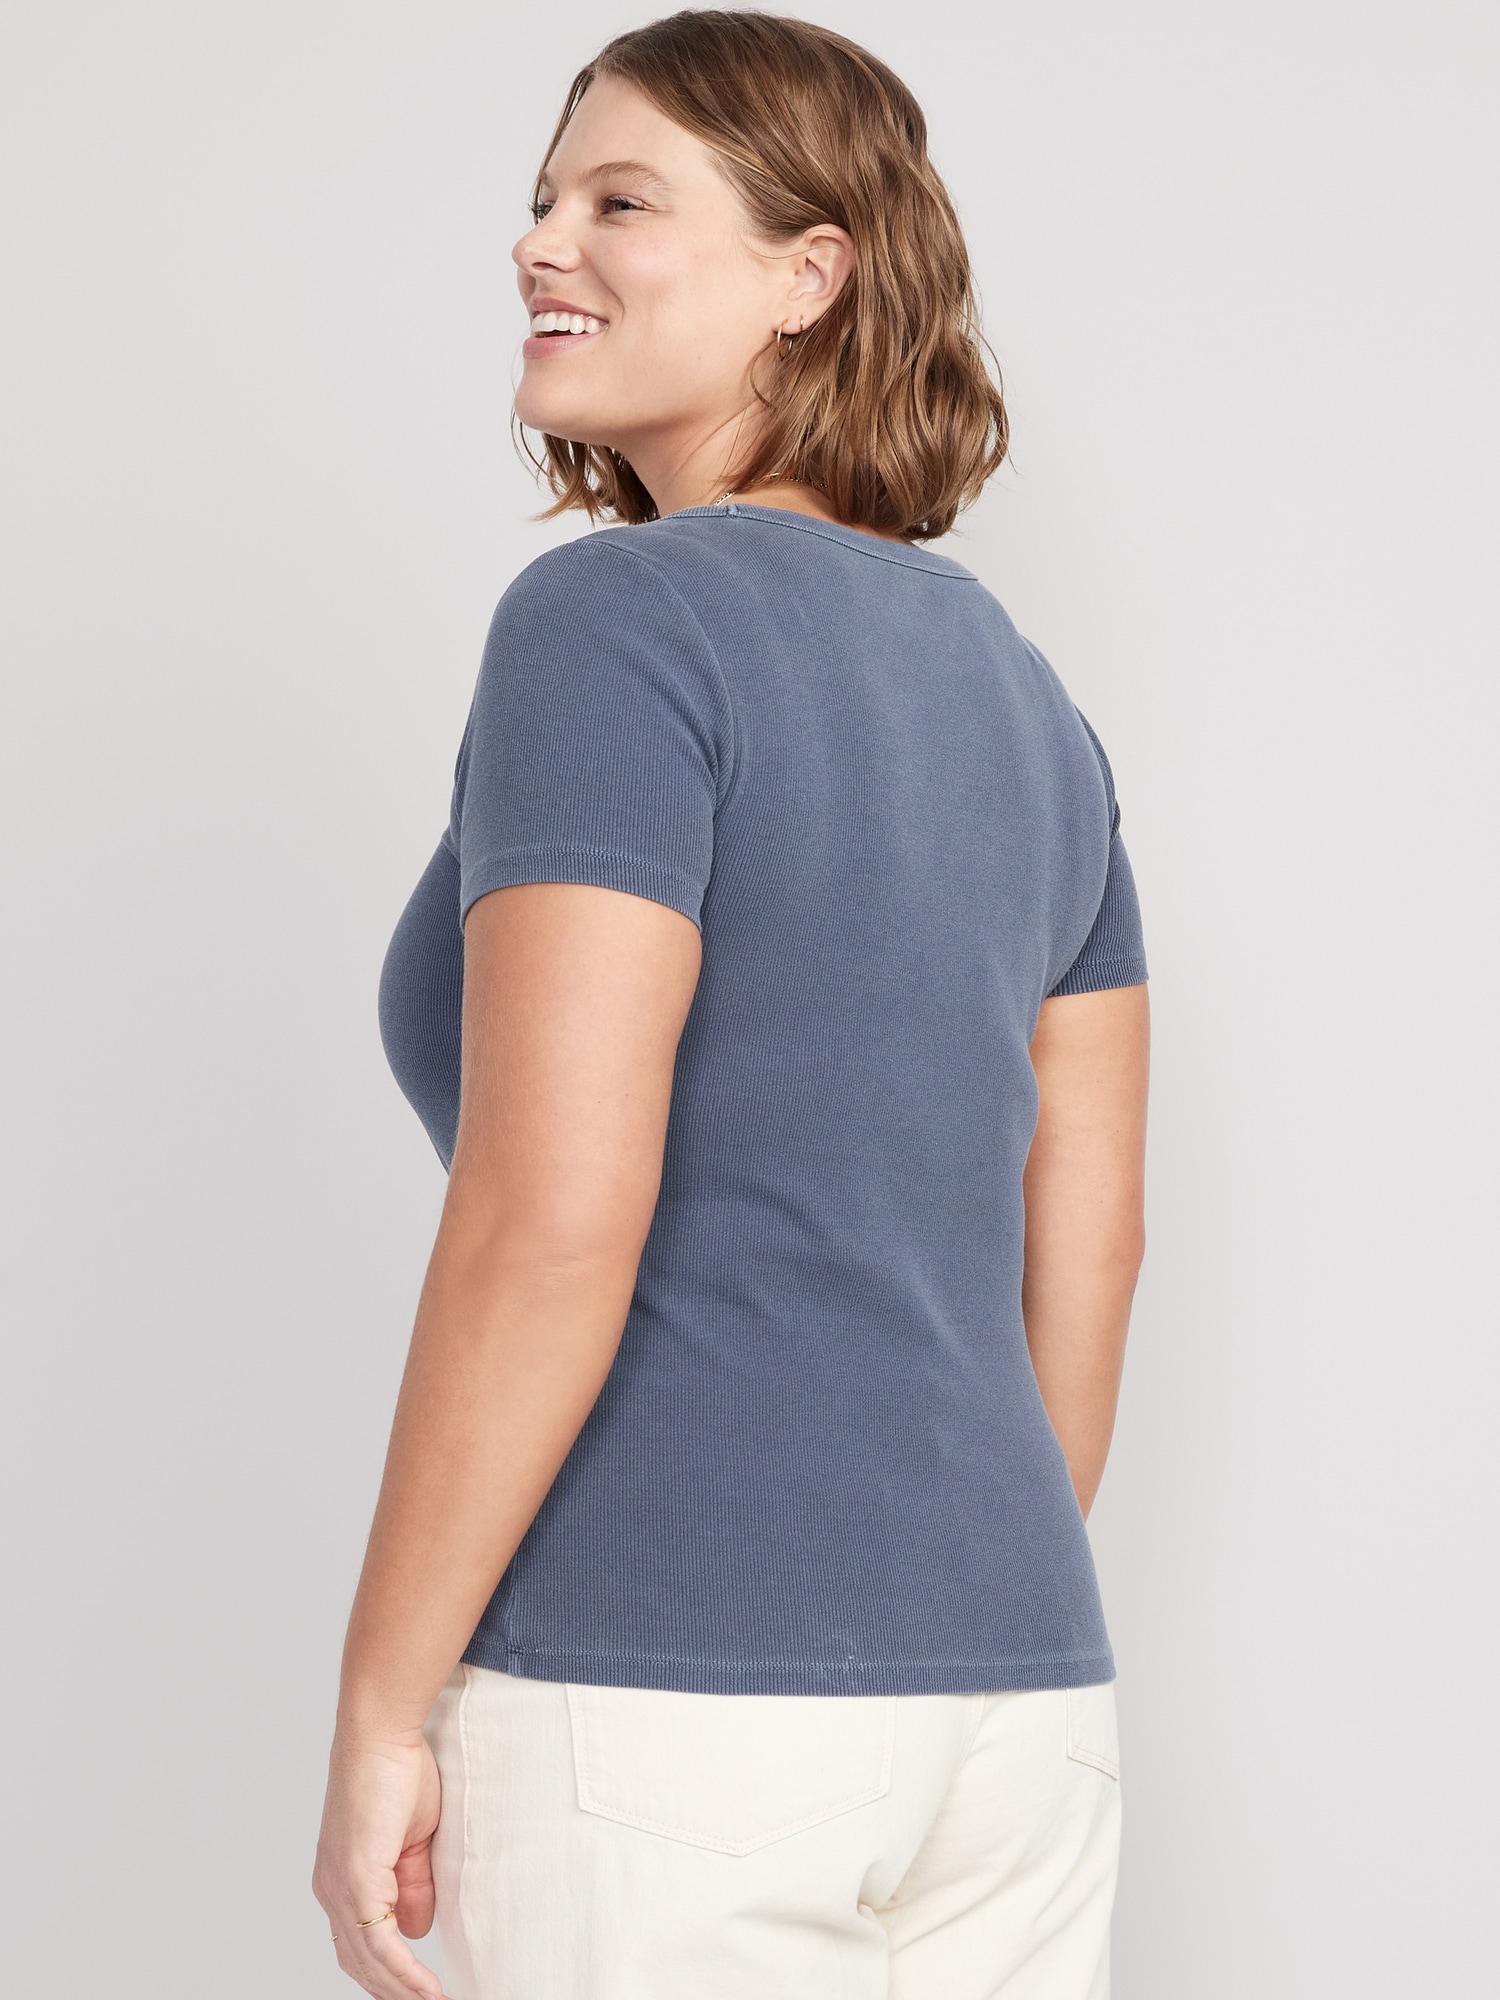 Fitted Scoop-Neck T-Shirt | Old Navy